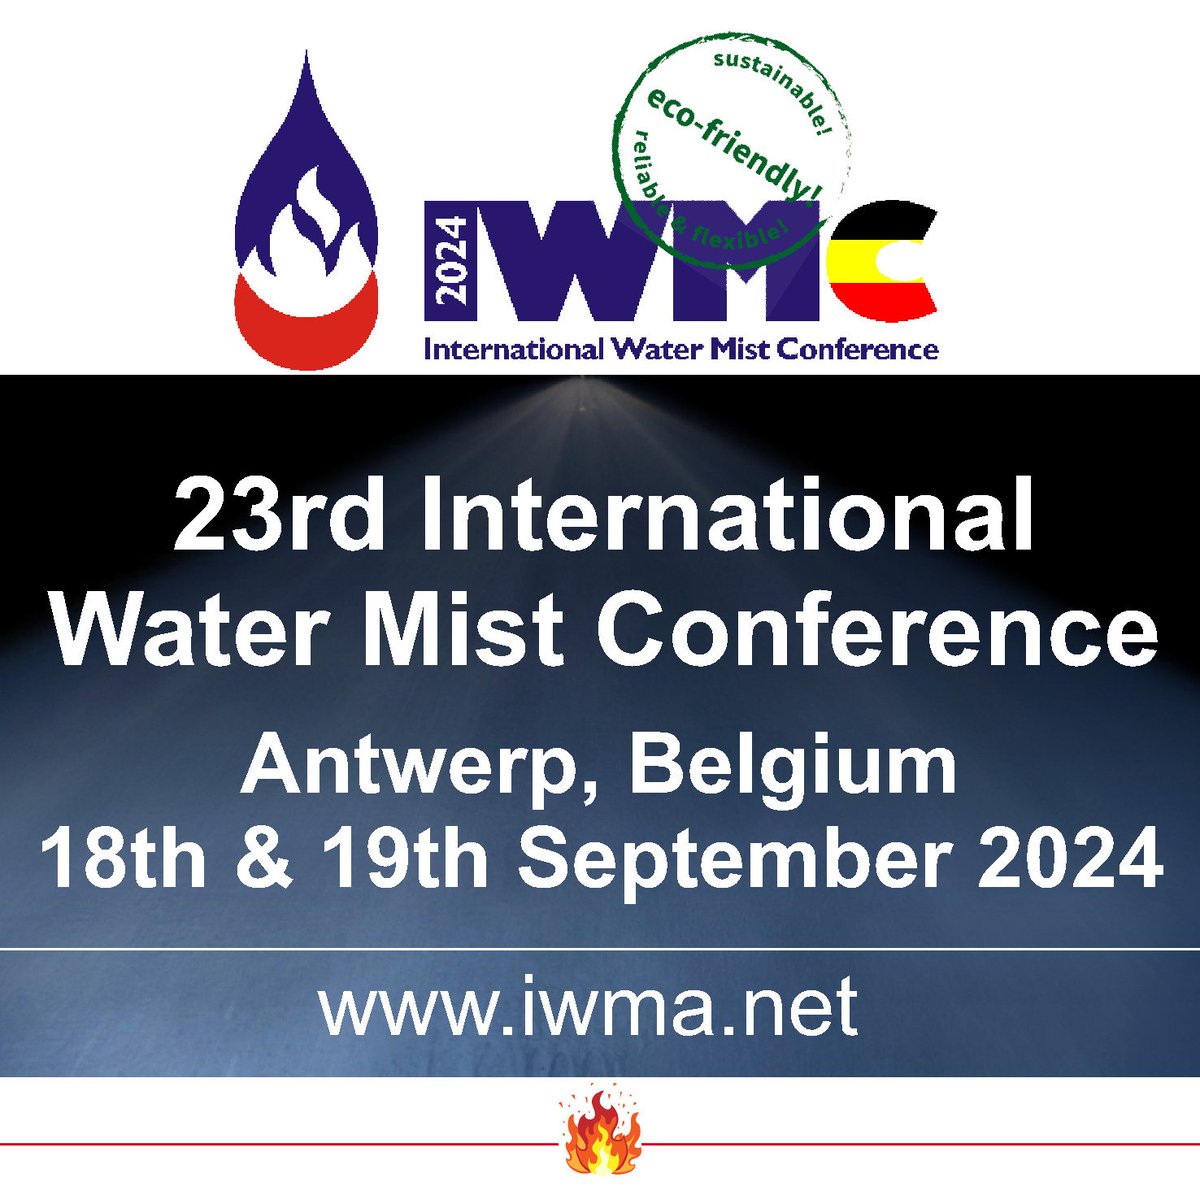 Ticket sales start on 15th May! But you can start thinking about attending / handing in an abstract (deadline: 15th May) / sponsoring right now! The #IWMC2024 is the place to go to learn more about #watermist technology! #IWMA #fireprotection #firesafety  #fireenginering